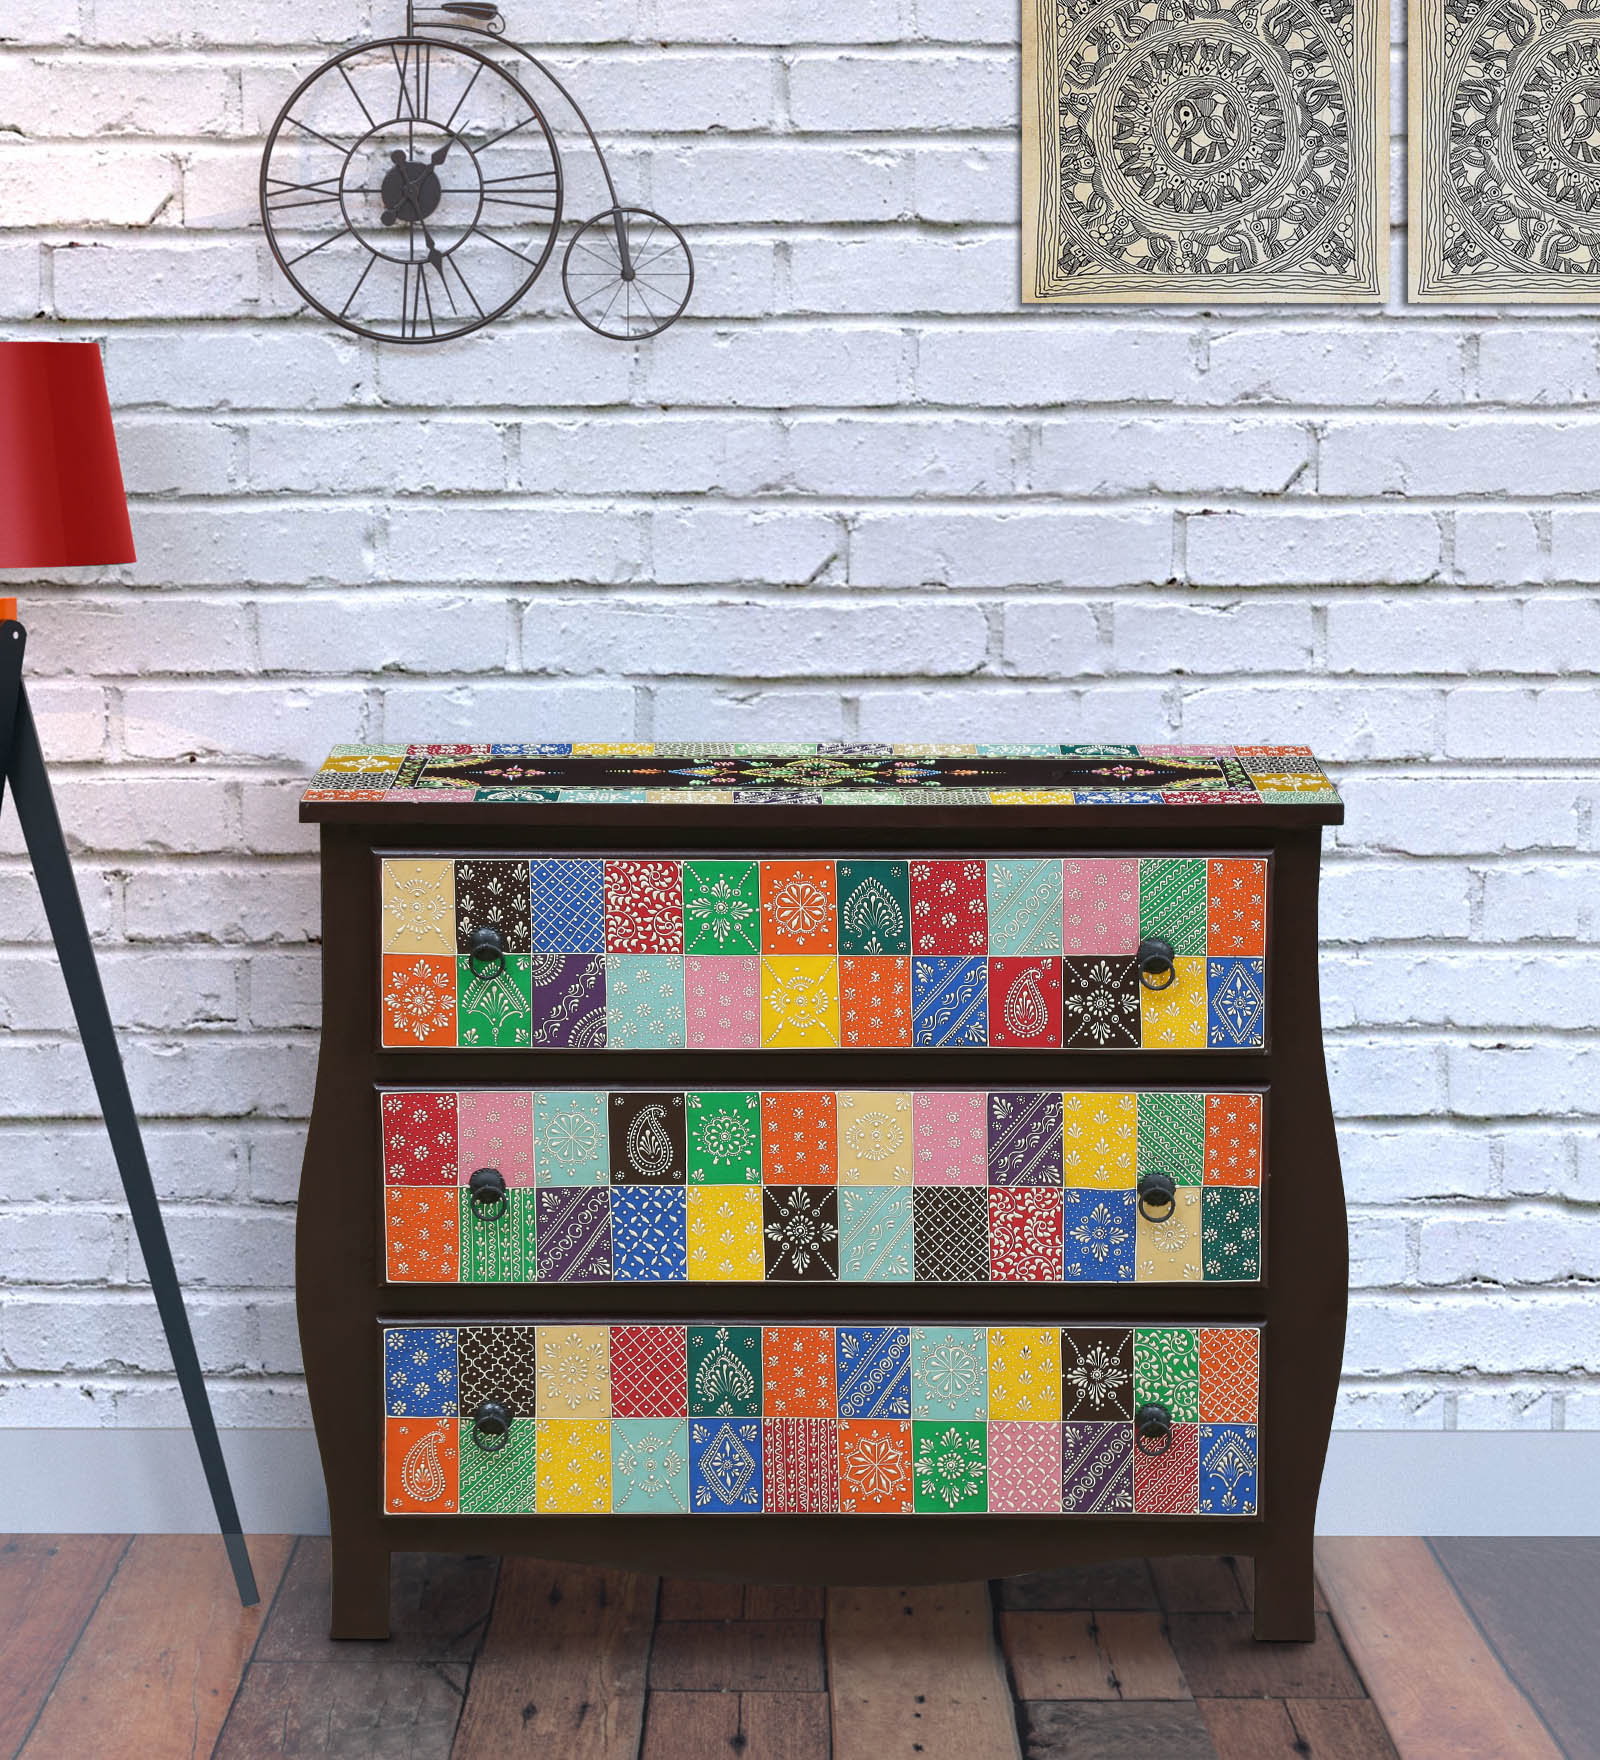 Aadi Solid Wood Hand-Painted Chest of Three Drawers by Mudramark from Pepperfry Rs. 33,749